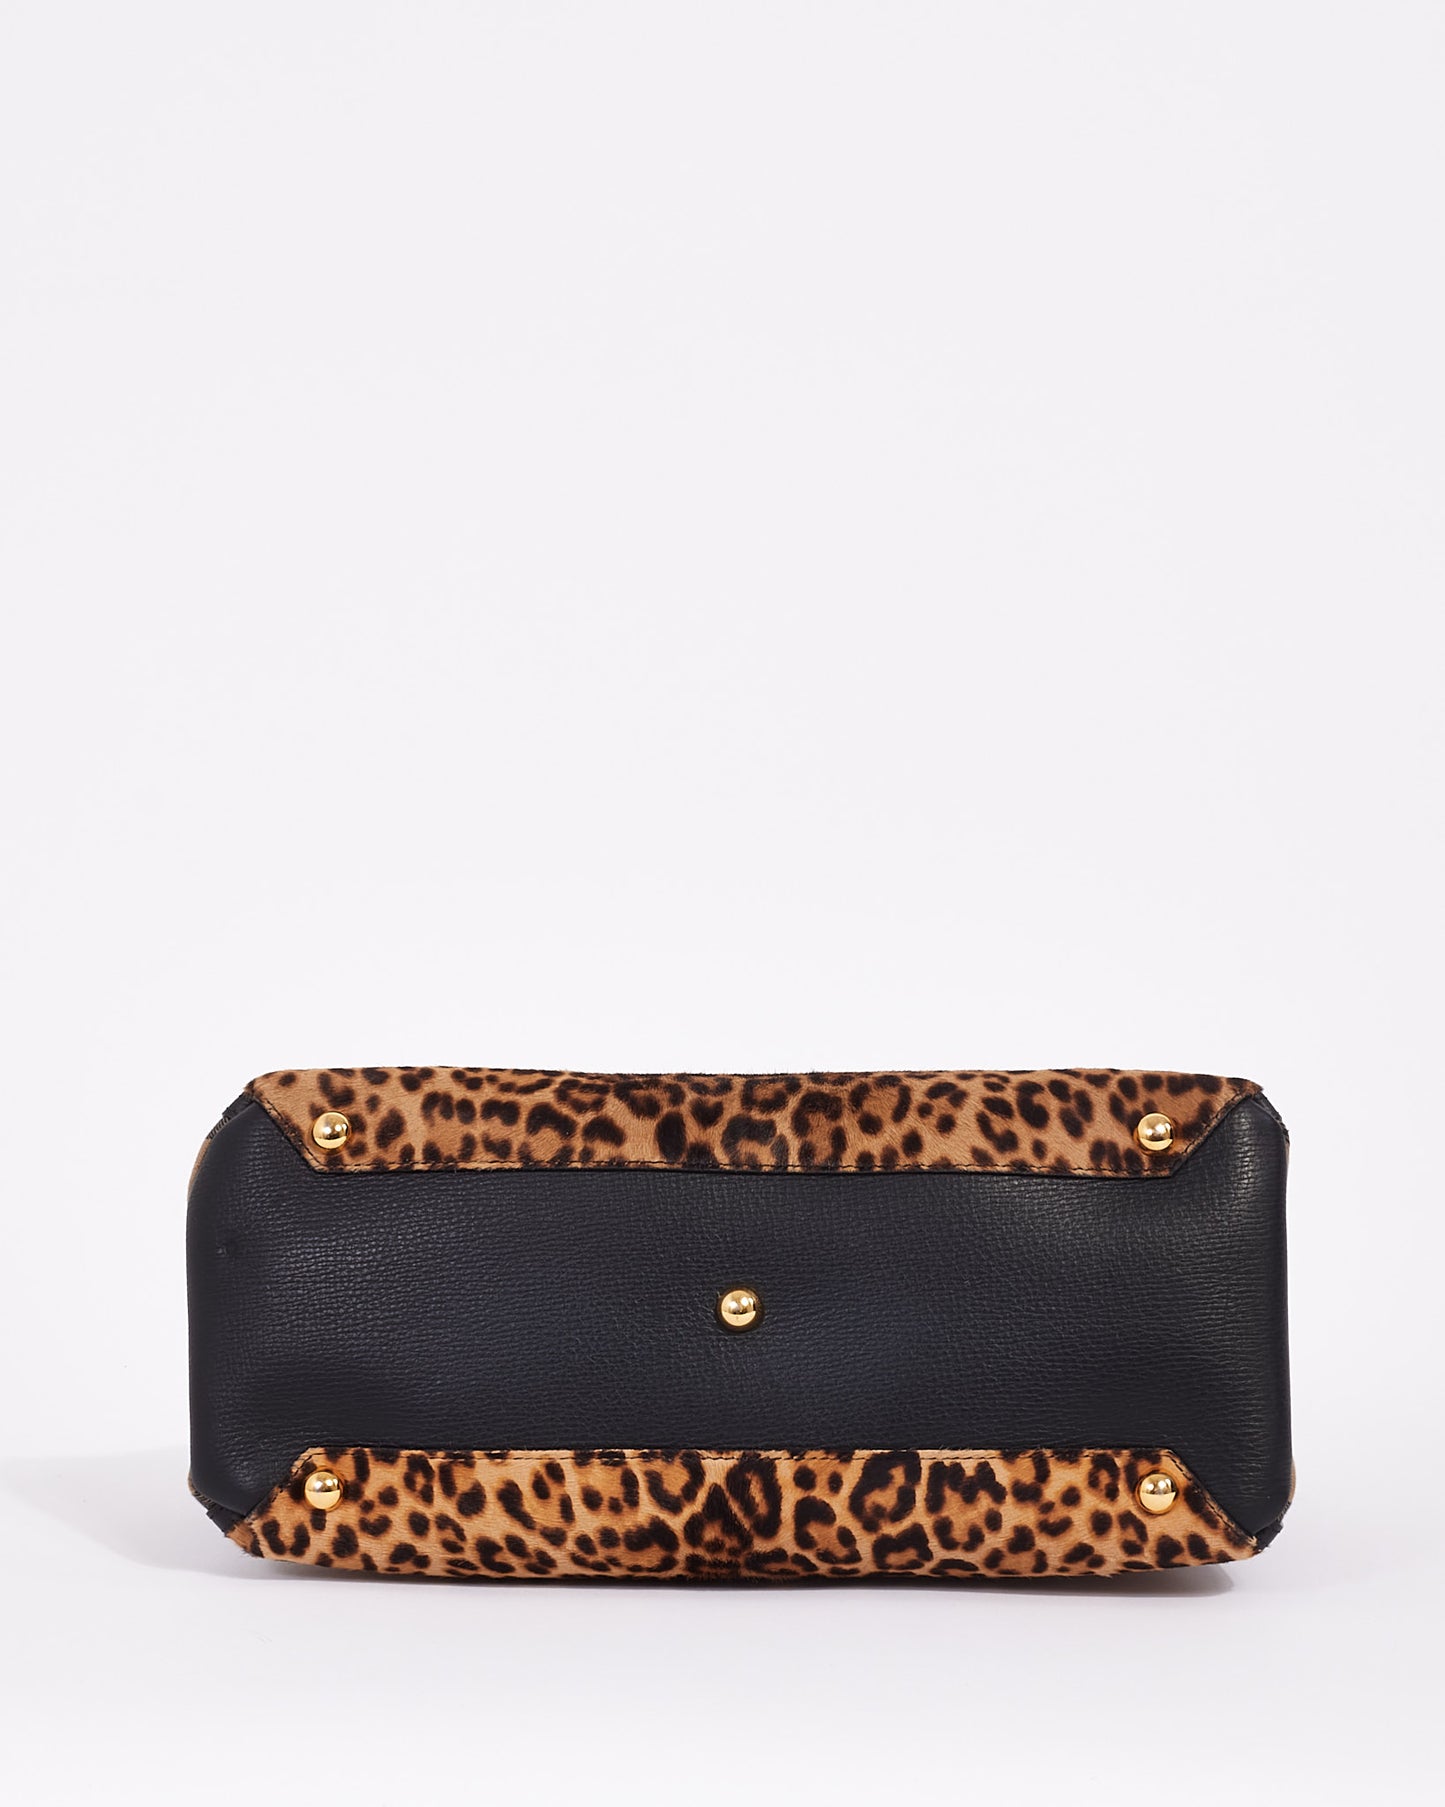 Burberry Leopard Calfhair Banner Tote Bag